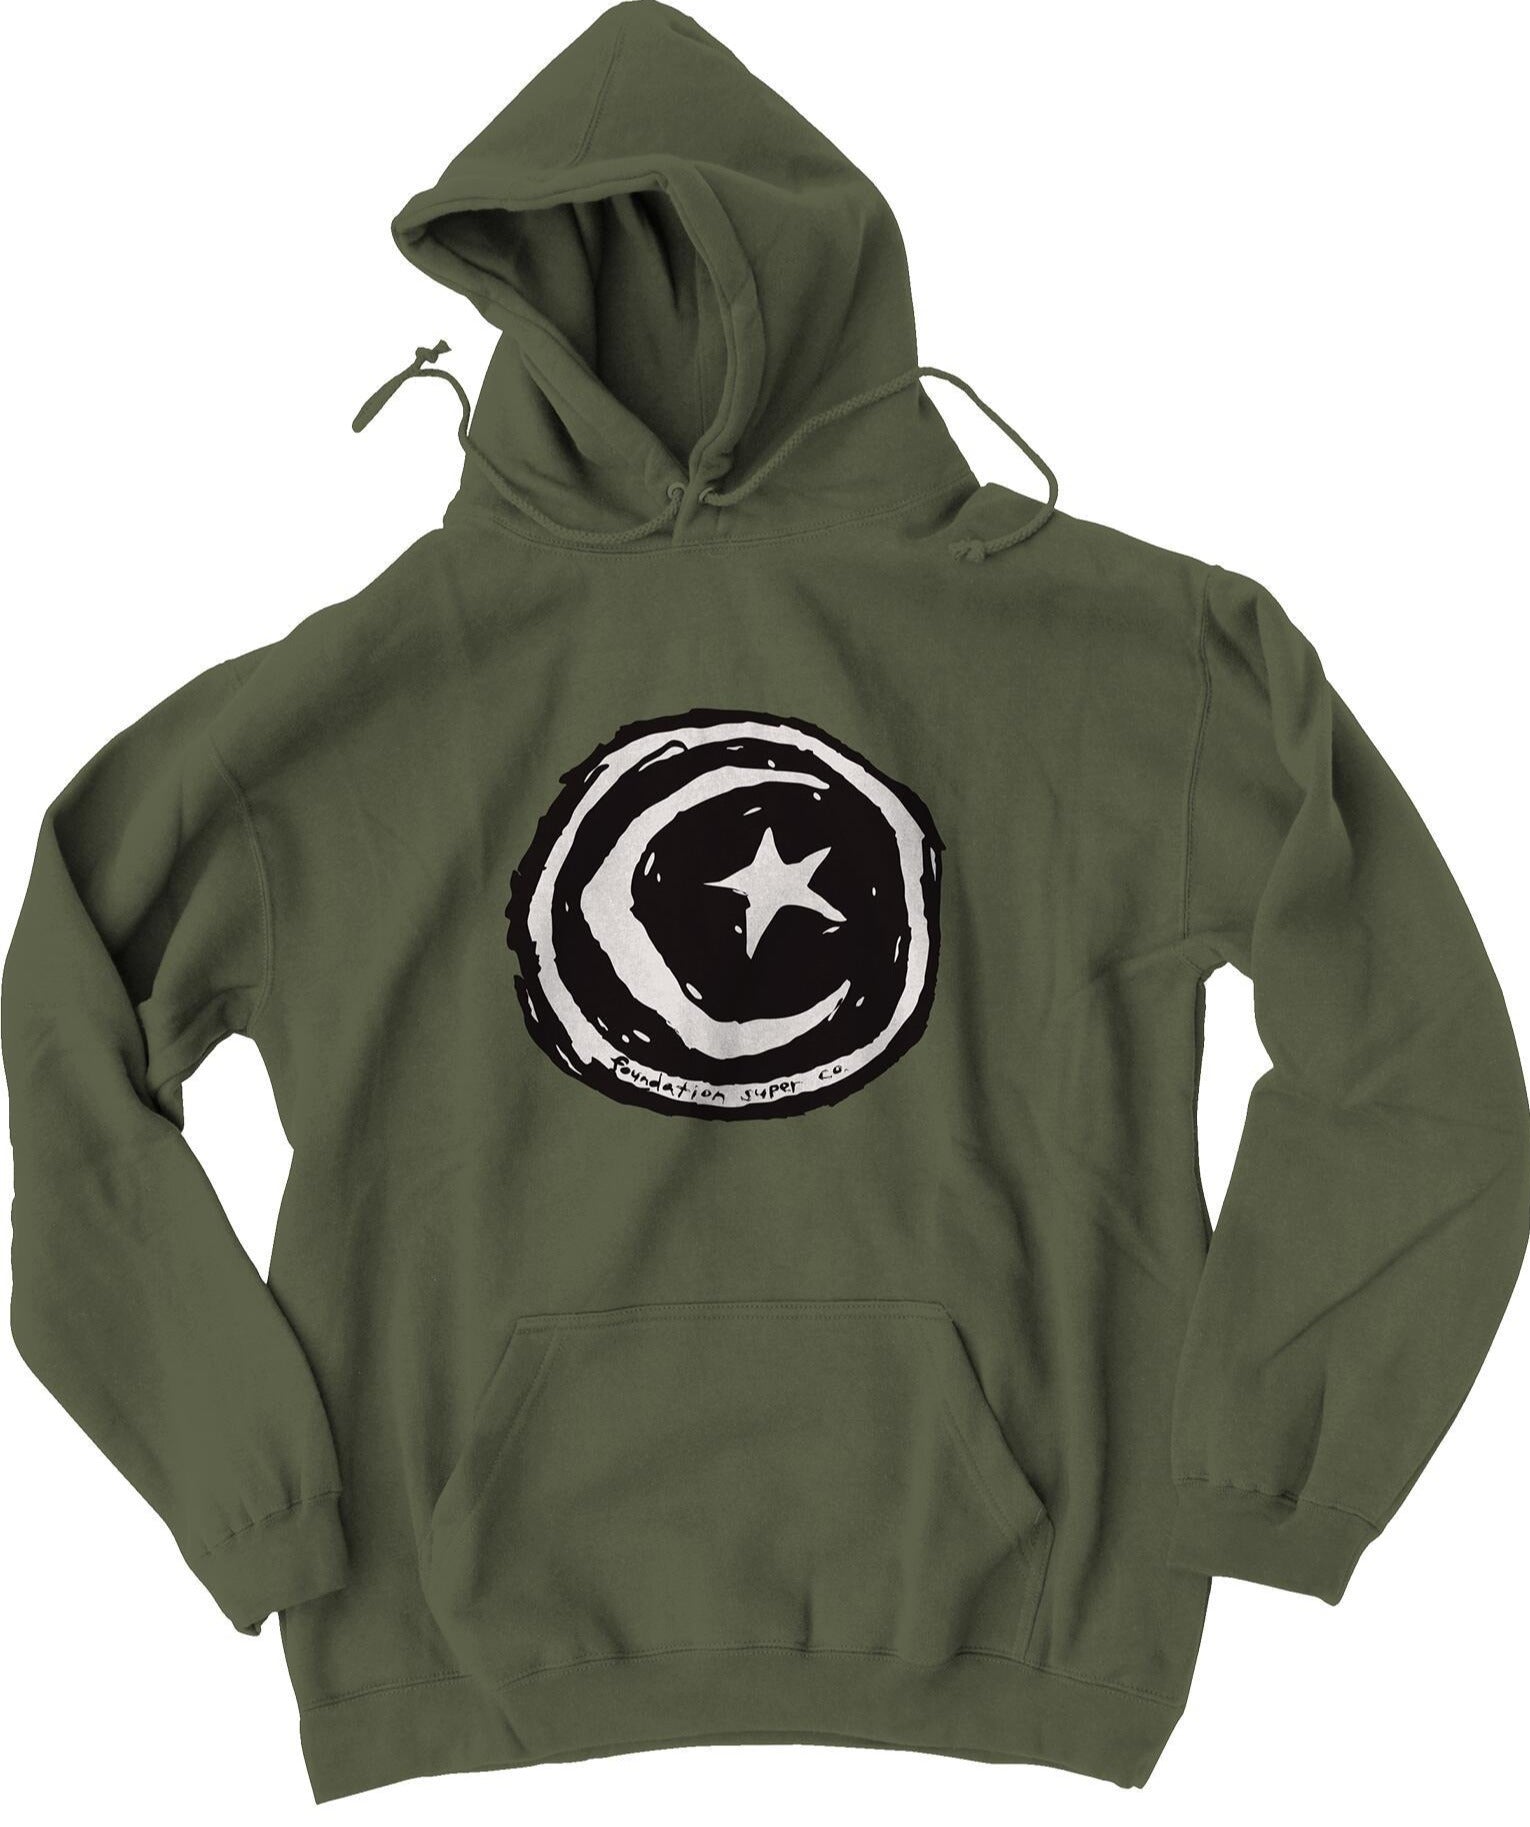 FOUNDATION SWEATER STAR & MOON ARMY